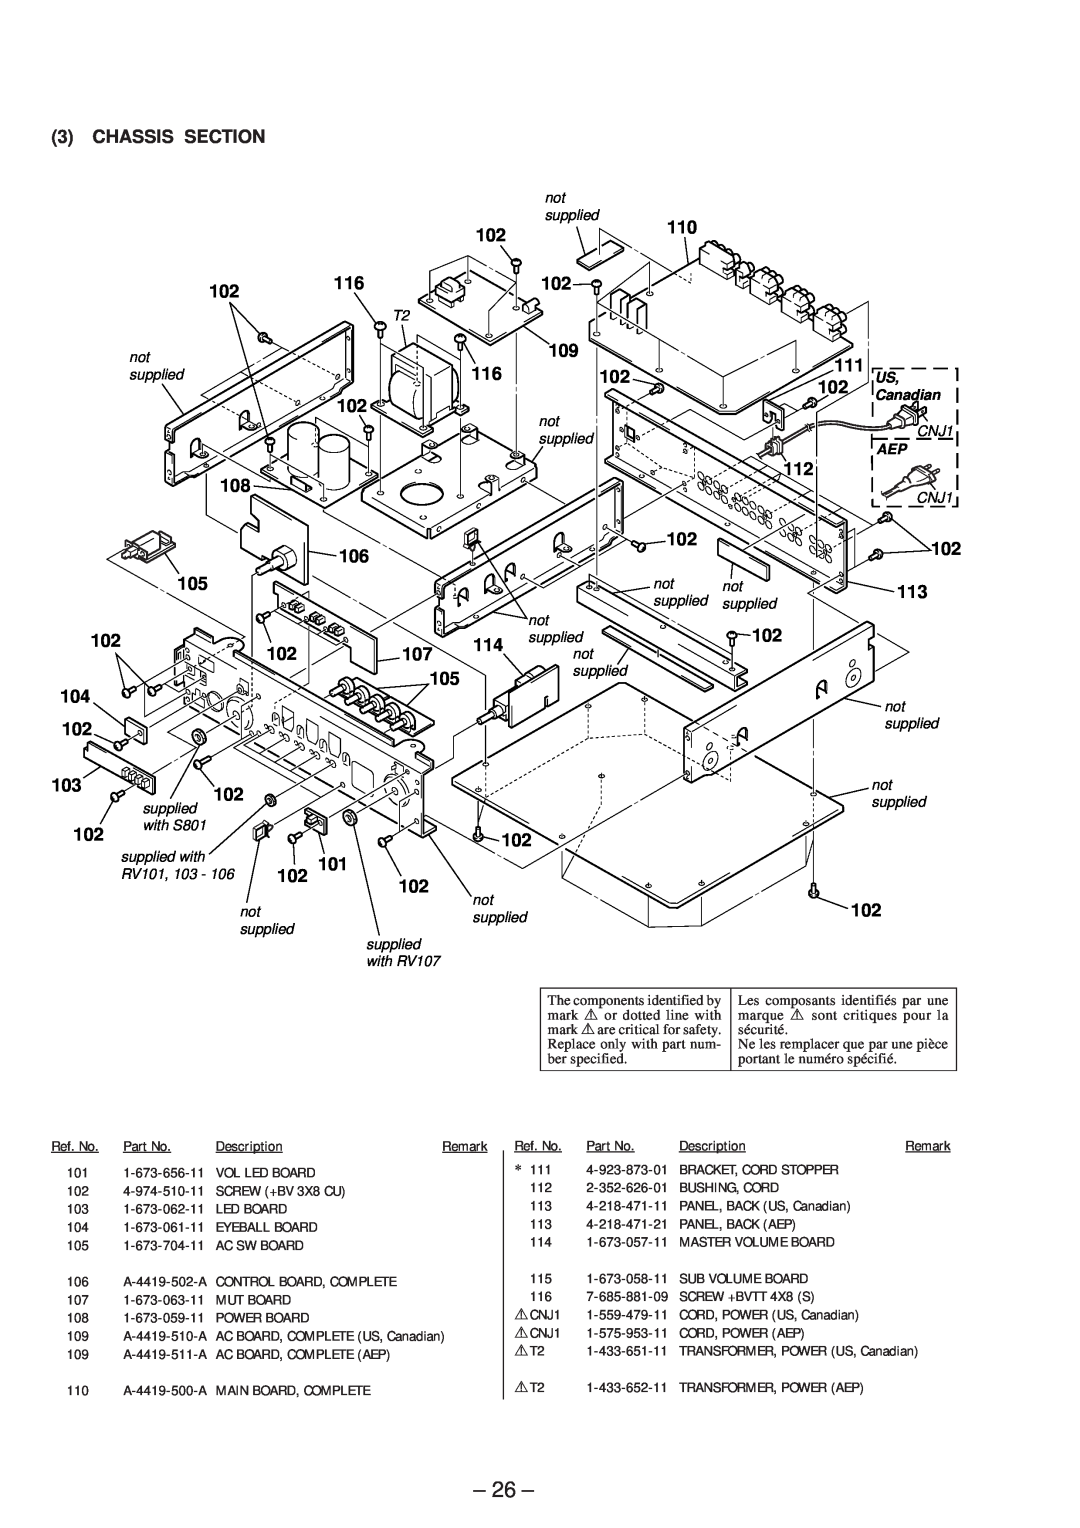 Sony TA-P9000ES service manual 3CHASSIS SECTION 